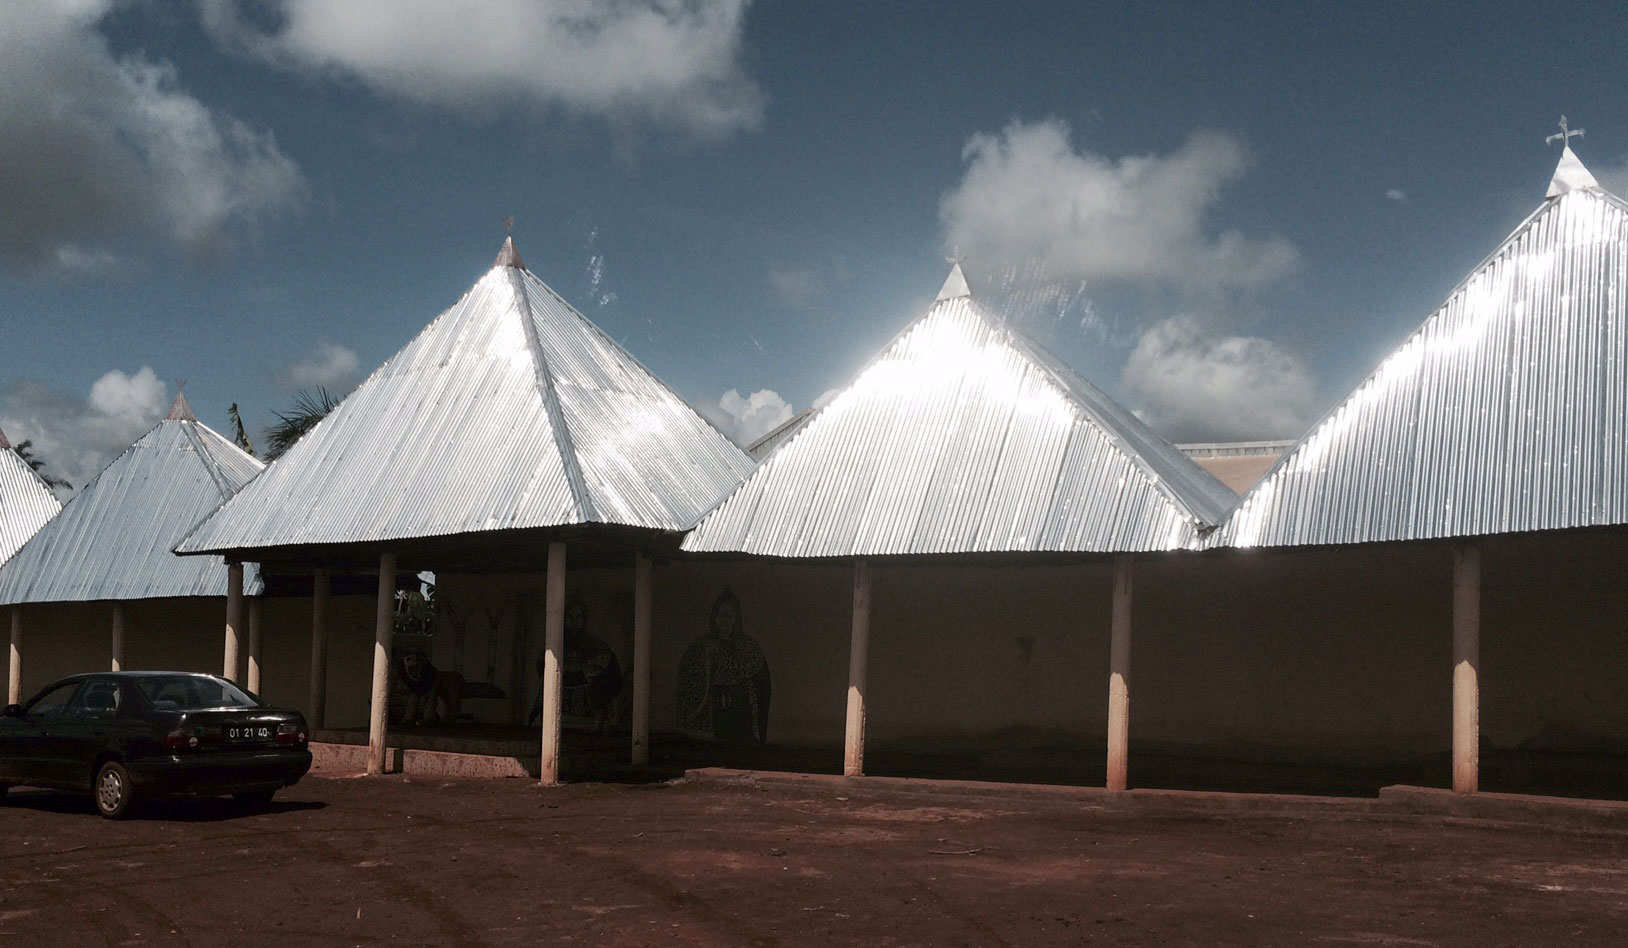 The exterior of the village palace, the Chief's residence. In this area of Cameroon, the pointed metal roof indicates a high position in the community. Photo: Ellen Rocco